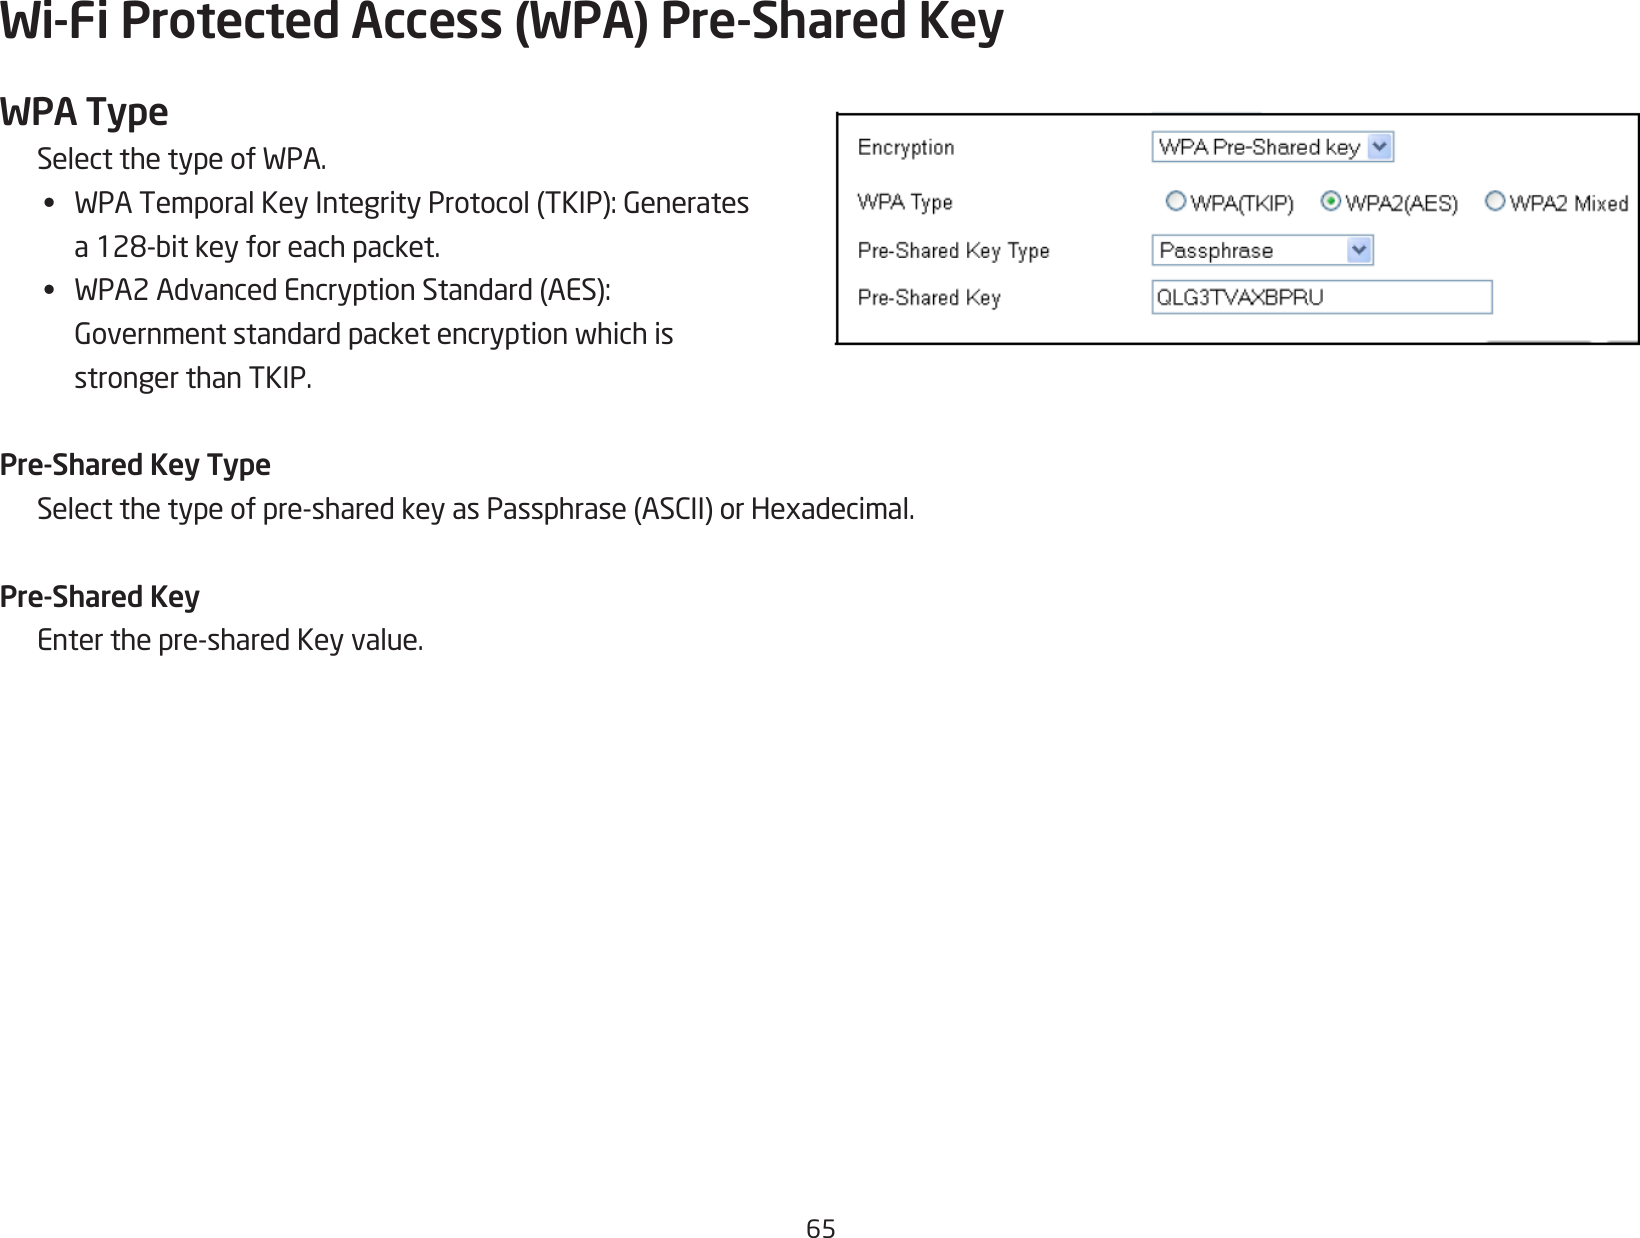 65Wi-Fi Protected Access (WPA) Pre-Shared KeyWPA TypeSelectthetypeofWPA.• WPATemporalKeyIntegrityProtocol(TKIP):Generates a128-bitkeyforeachpacket.• WPA2AdvancedEncryptionStandard(AES): Governmentstandardpacketencryptionwhichis  stronger than TKIP.Pre-Shared Key TypeSelectthetypeofpre-sharedkeyasPassphrase(ASCII)orHexadecimal.Pre-Shared KeyEnterthepre-sharedKeyvalue.